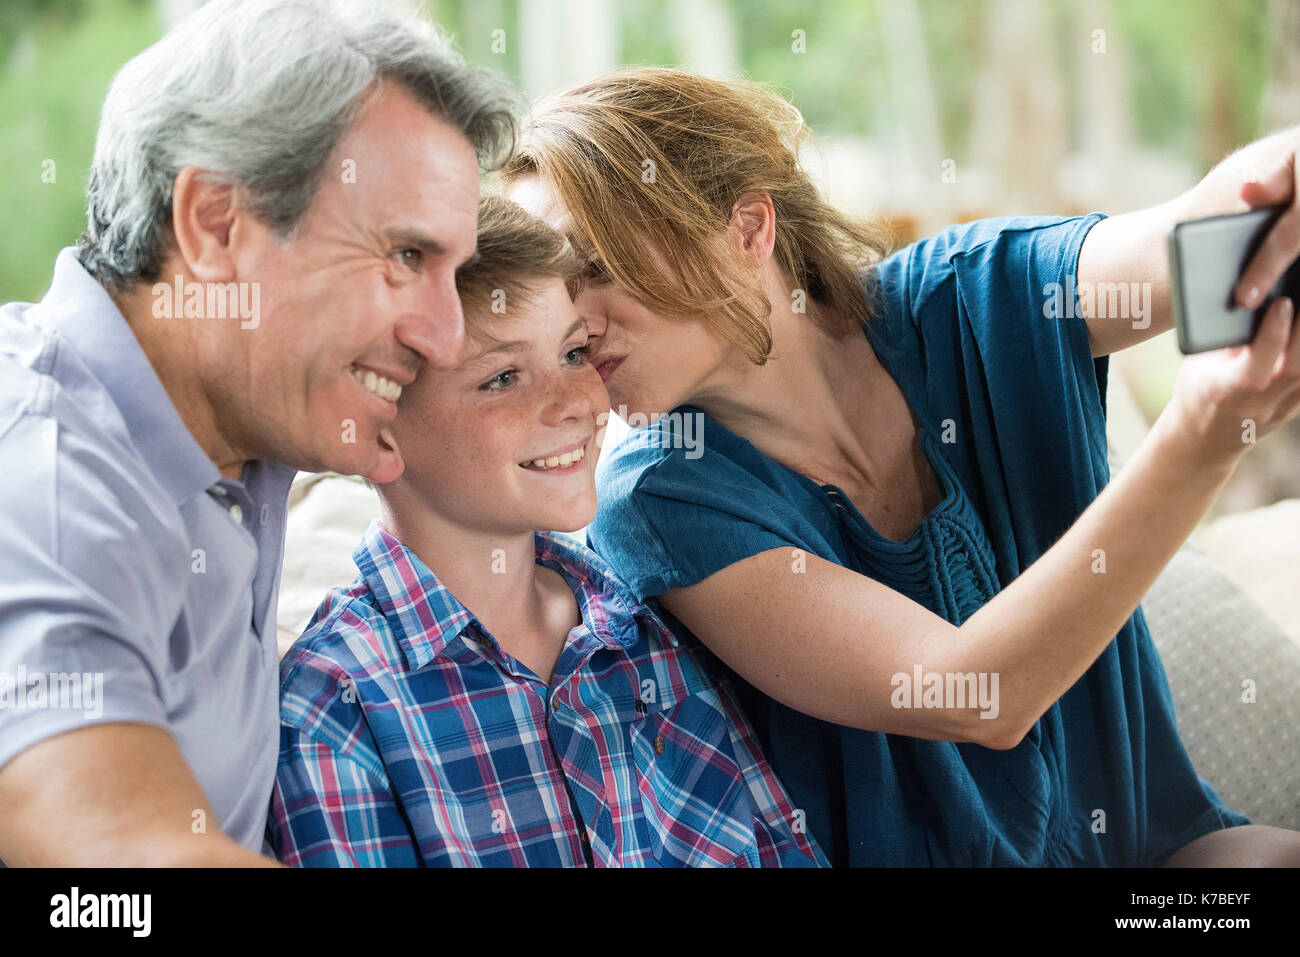 Parents and young son posing for a selfie Stock Photo